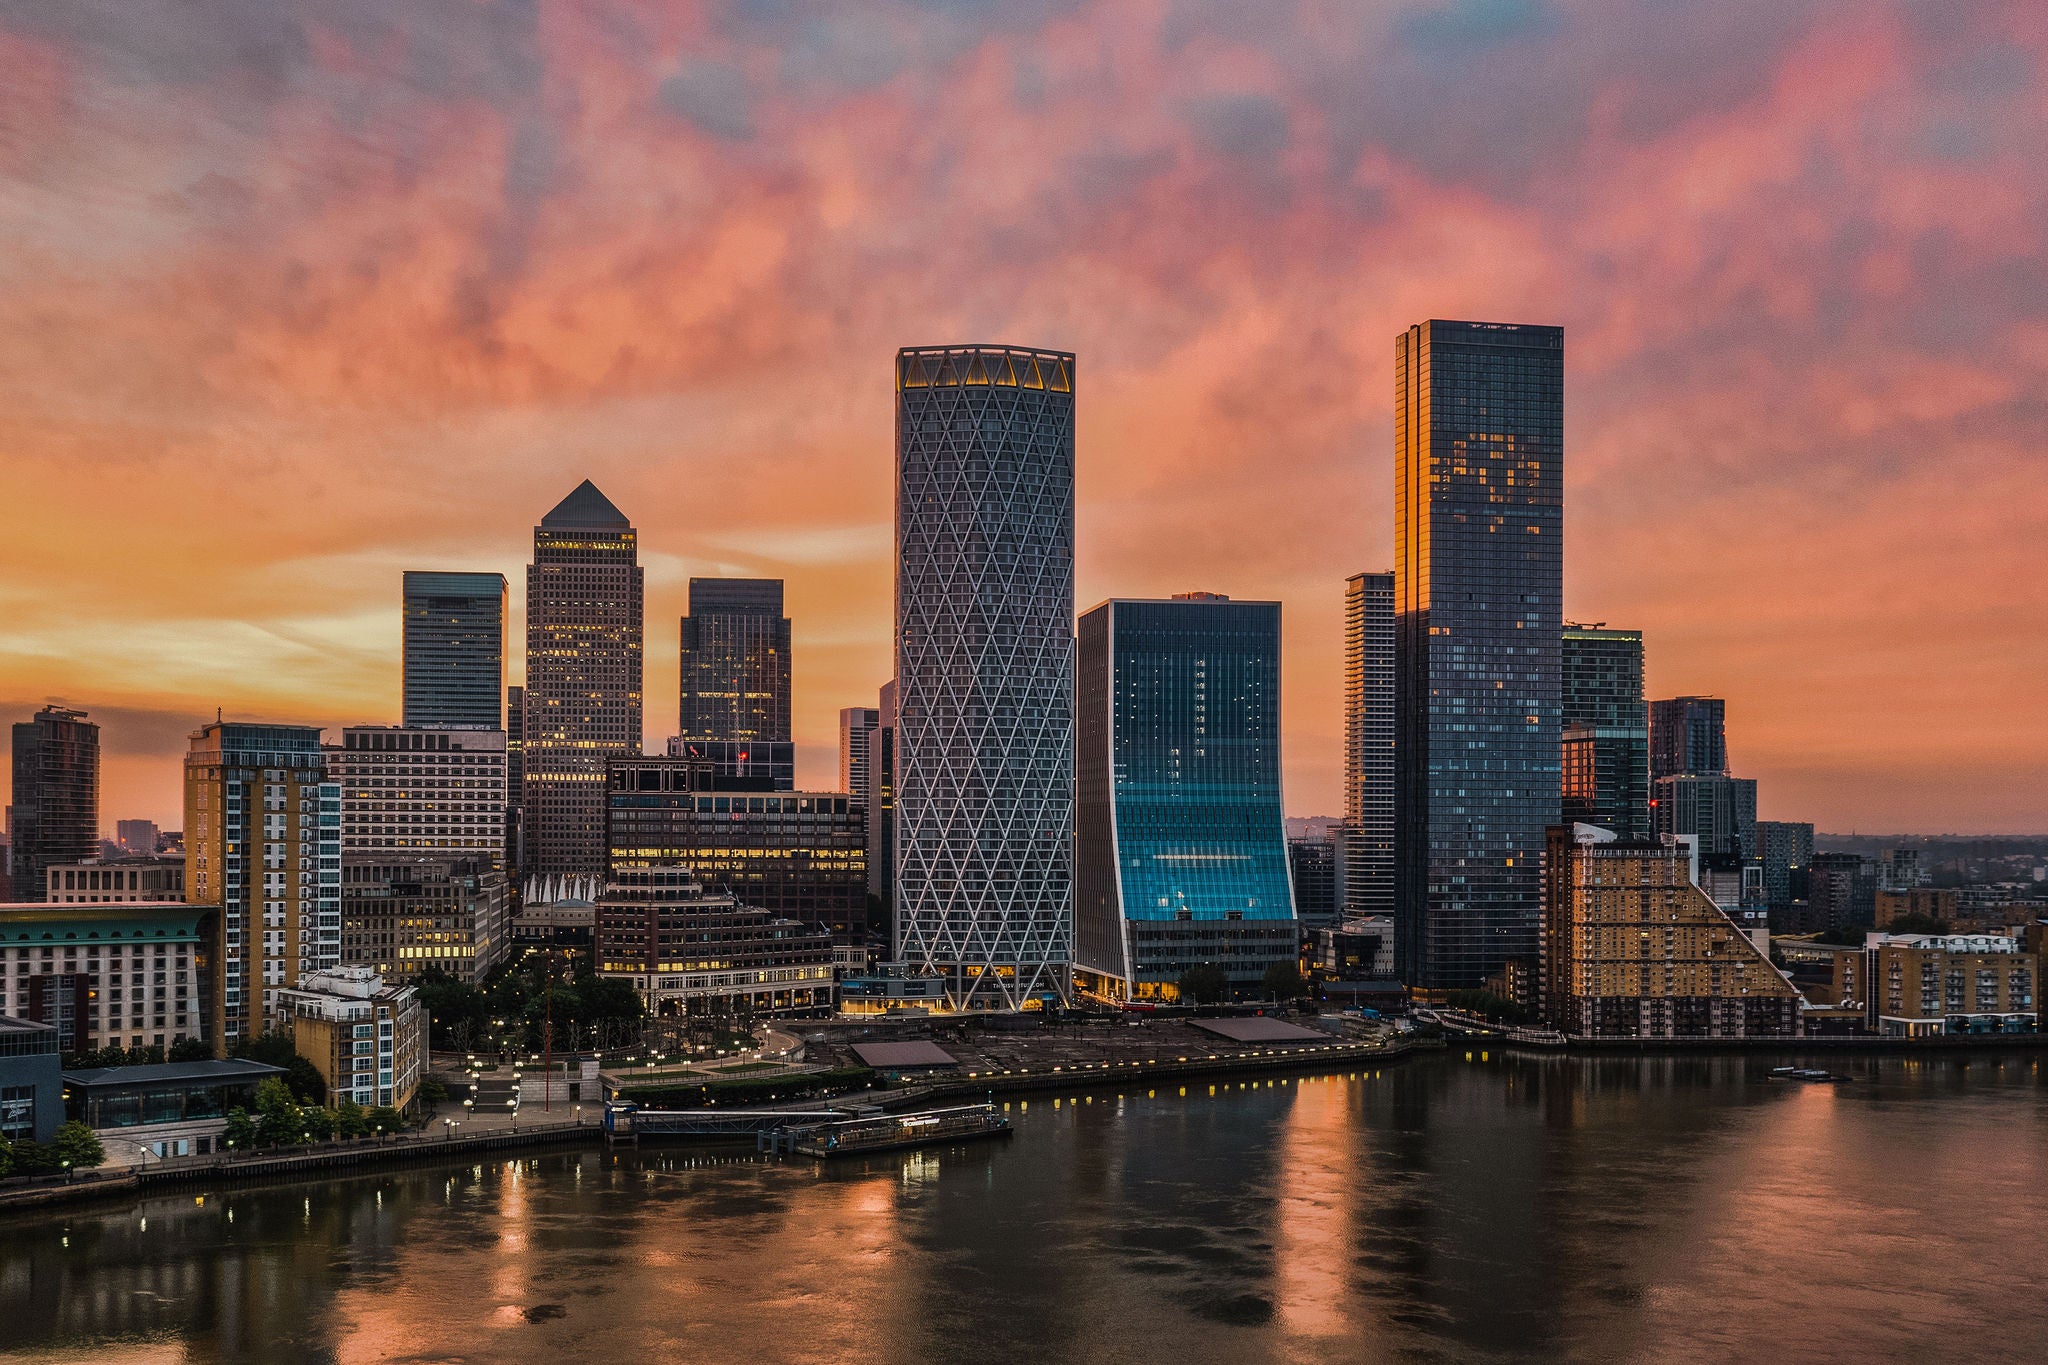 An elevated view of The Canary Wharf skyline, London at sunrise. Building between two tal towers is new headquarters of the European Bank for Reconstruction and Development (EBRD)